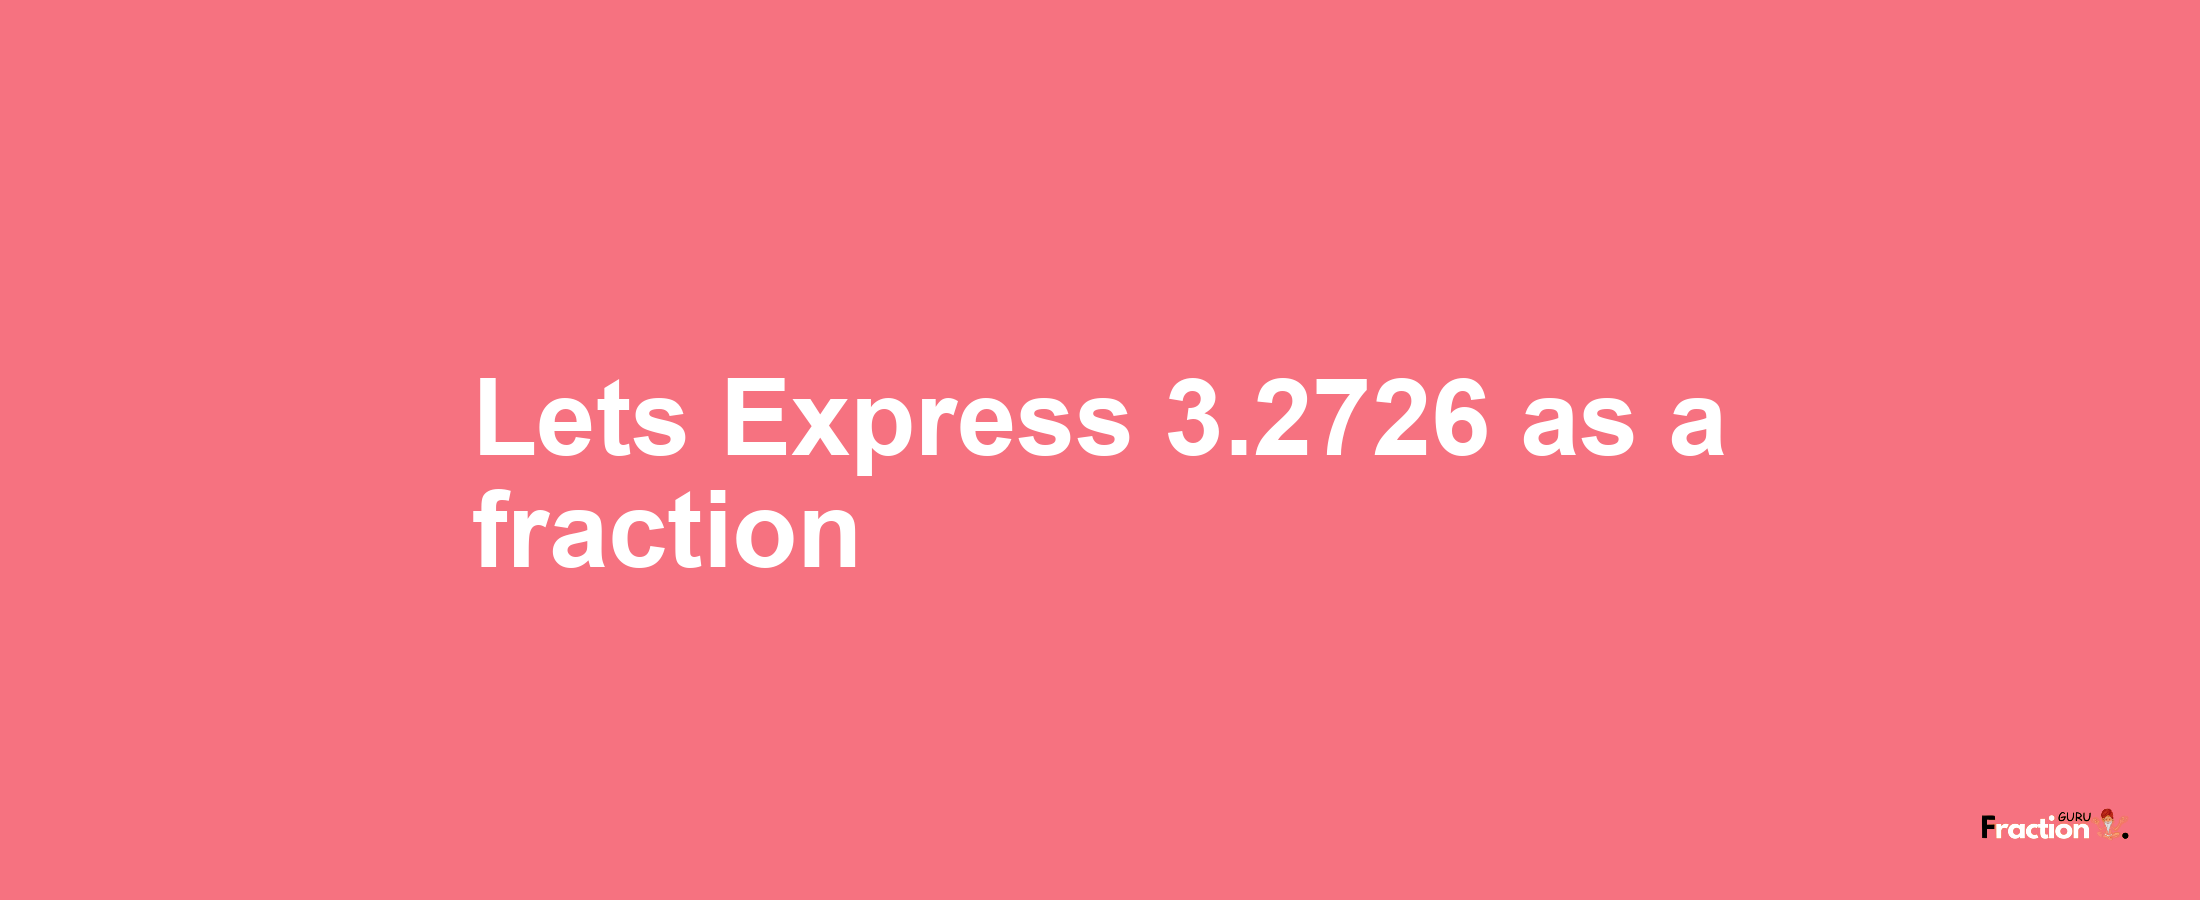 Lets Express 3.2726 as afraction